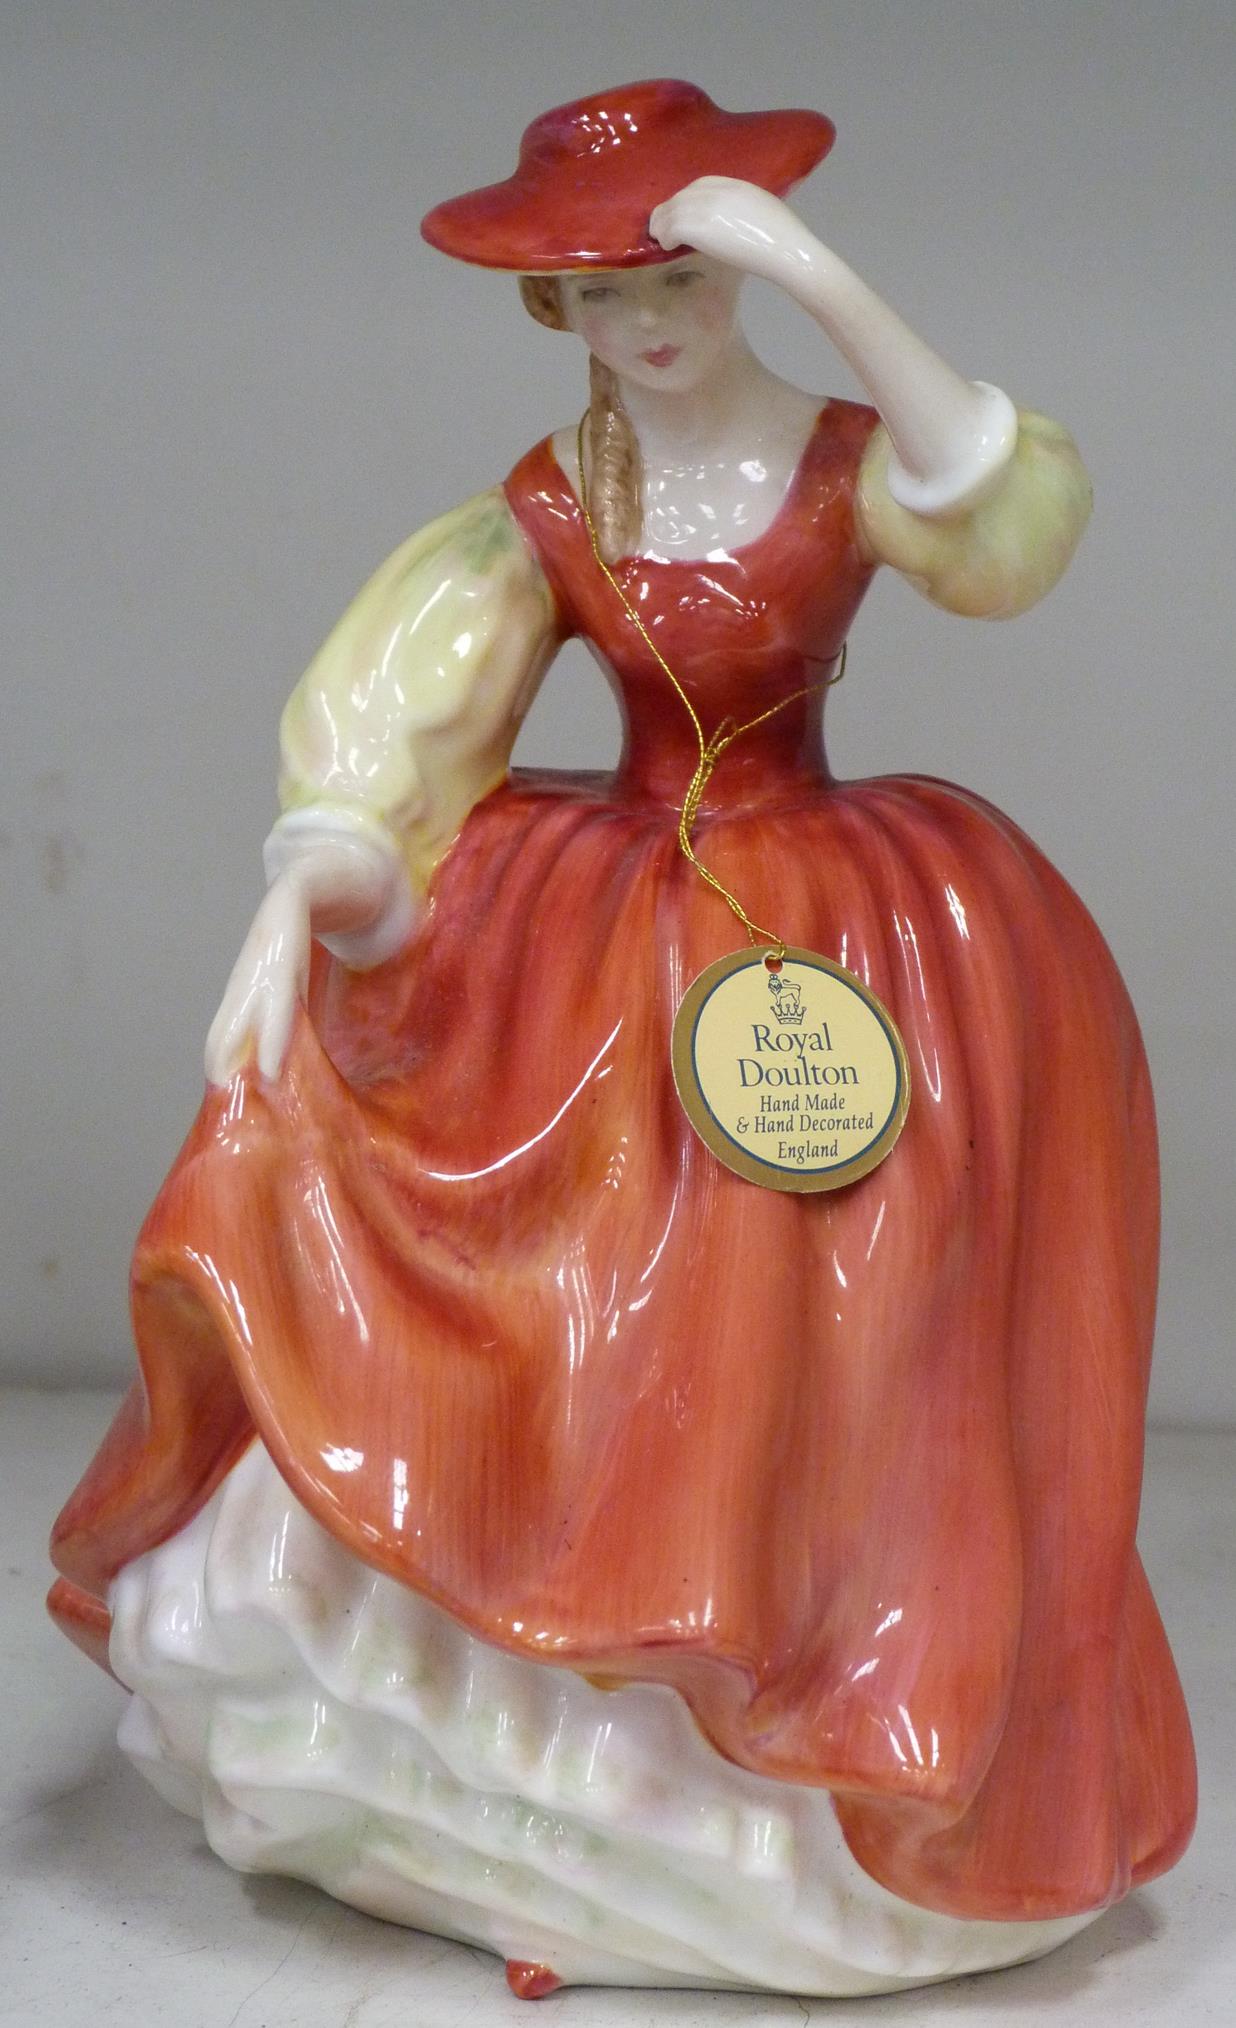 This is a Timed Online Auction on Bidspotter.co.uk, Click here to bid. Three Royal Doulton Figurines - Image 2 of 4